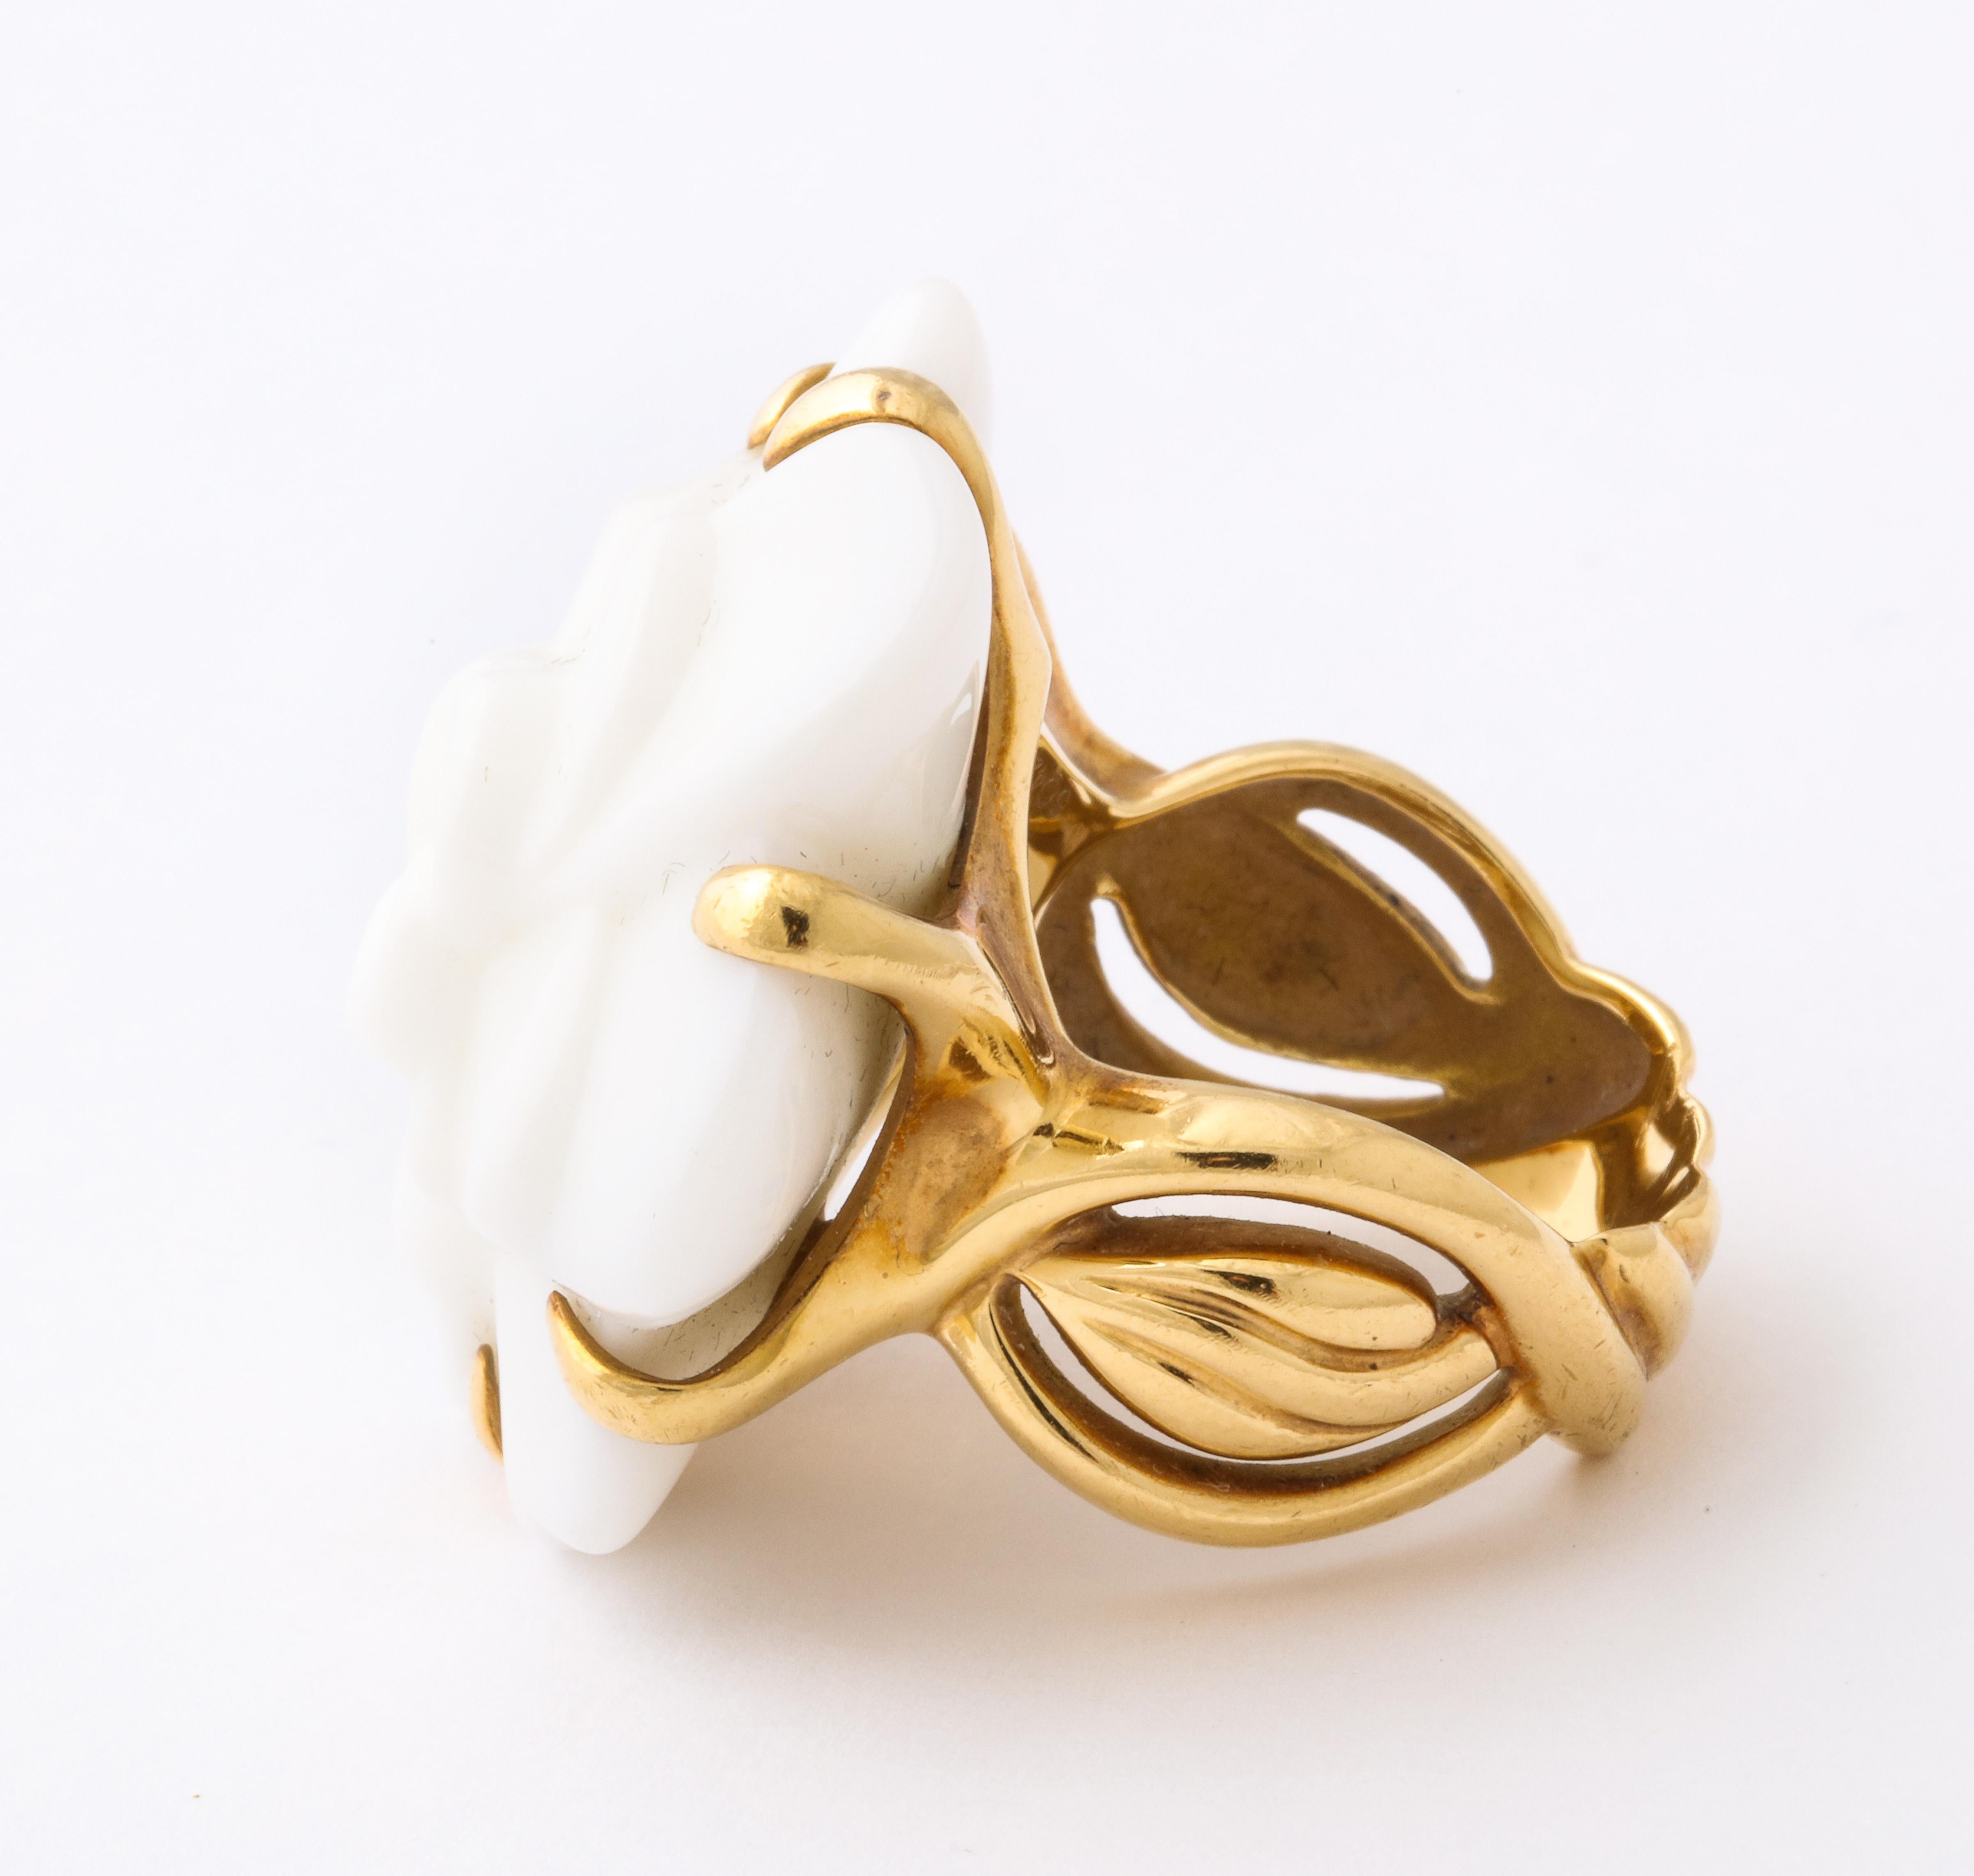 We offer a vintage Chanel fashion ring of 18K gold holding a large camellia flower blossom of carved white agate, measuring 1 1/4 inch diameter, weighing 23.79 grams. Fits finger size 7 1/2, and signed CHANEL. Gold and makers marks. The ultra chic